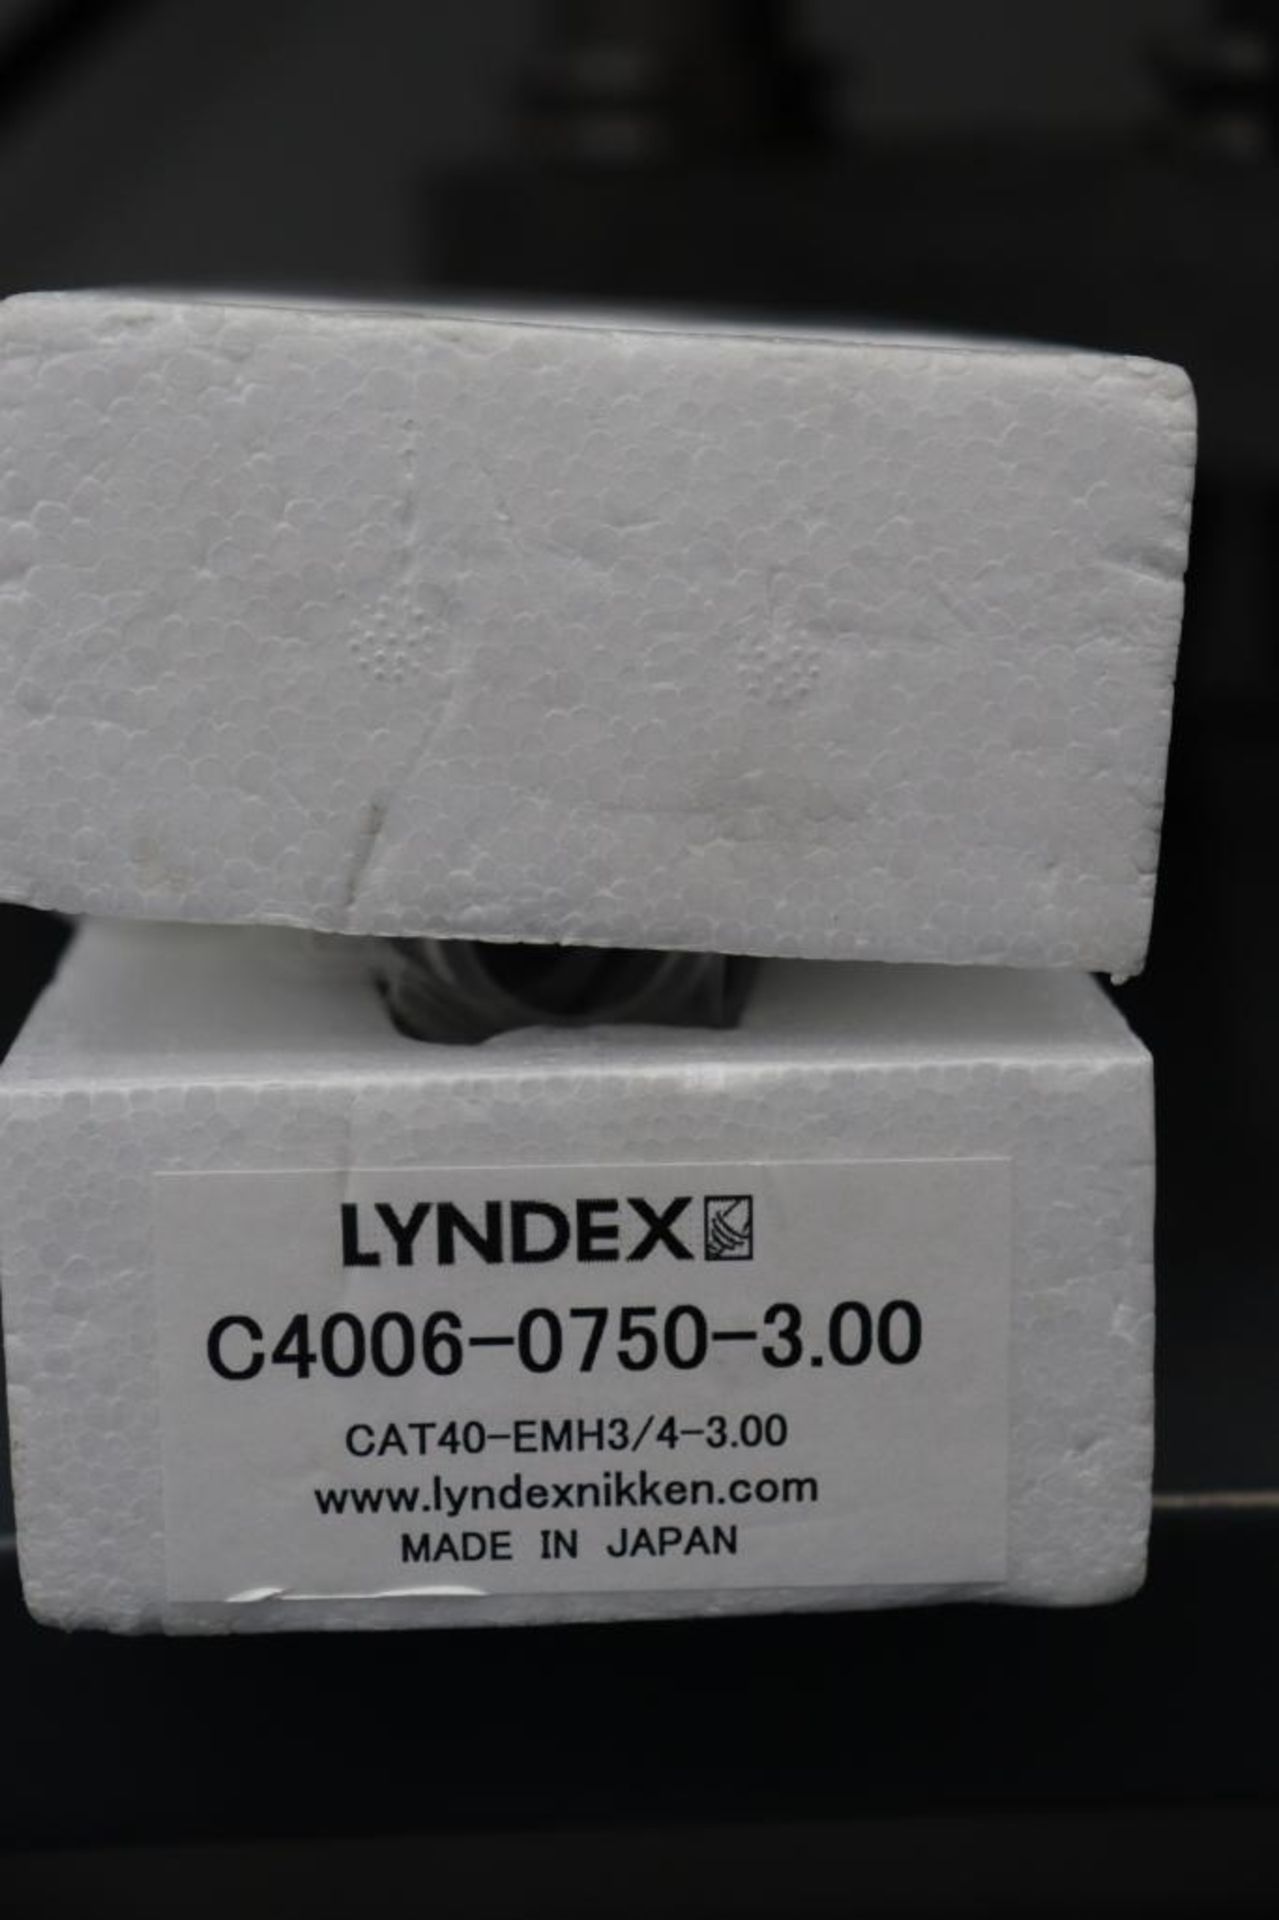 Lyndex Cat 40 end mill holders w/ organizer - Image 7 of 7